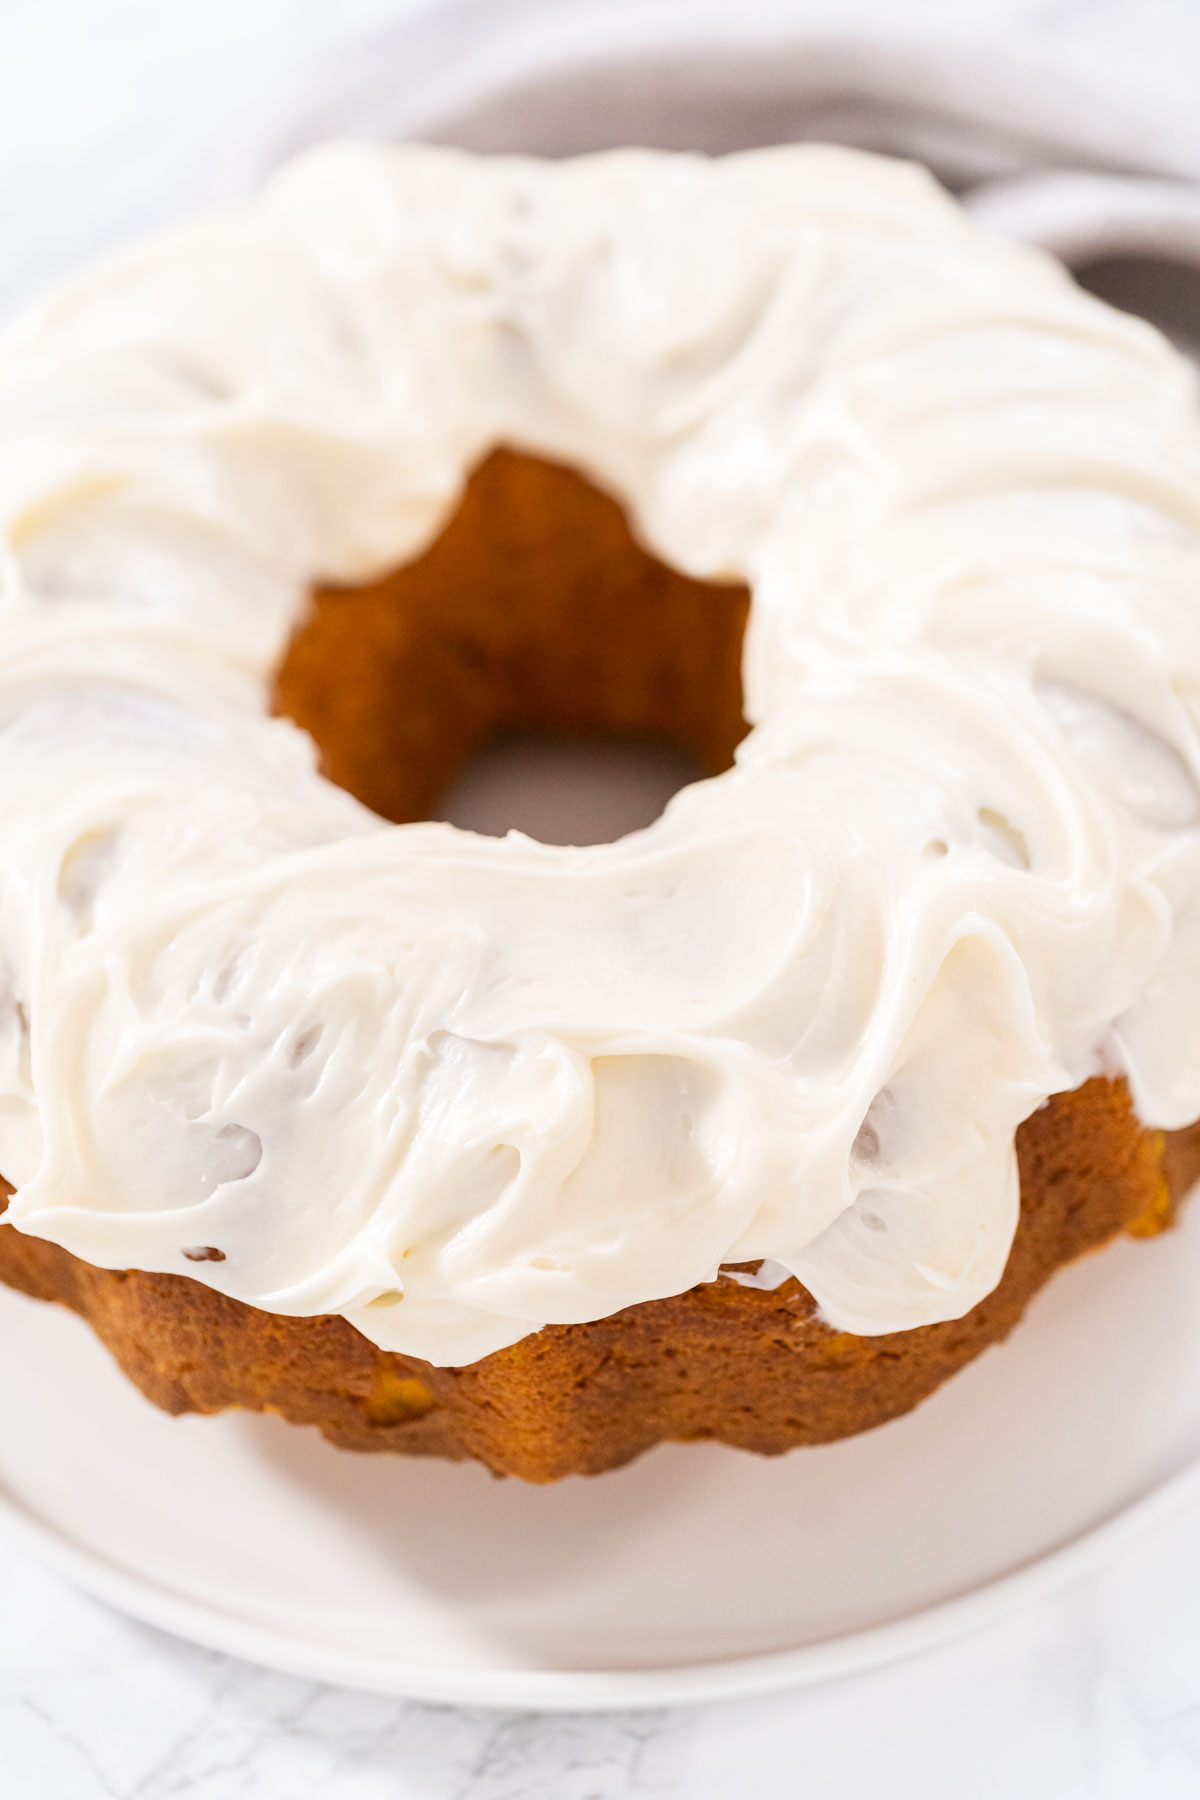 Coconut Chiffon Bundt Cake with Coconut Frosting Recipe - Joanne Chang